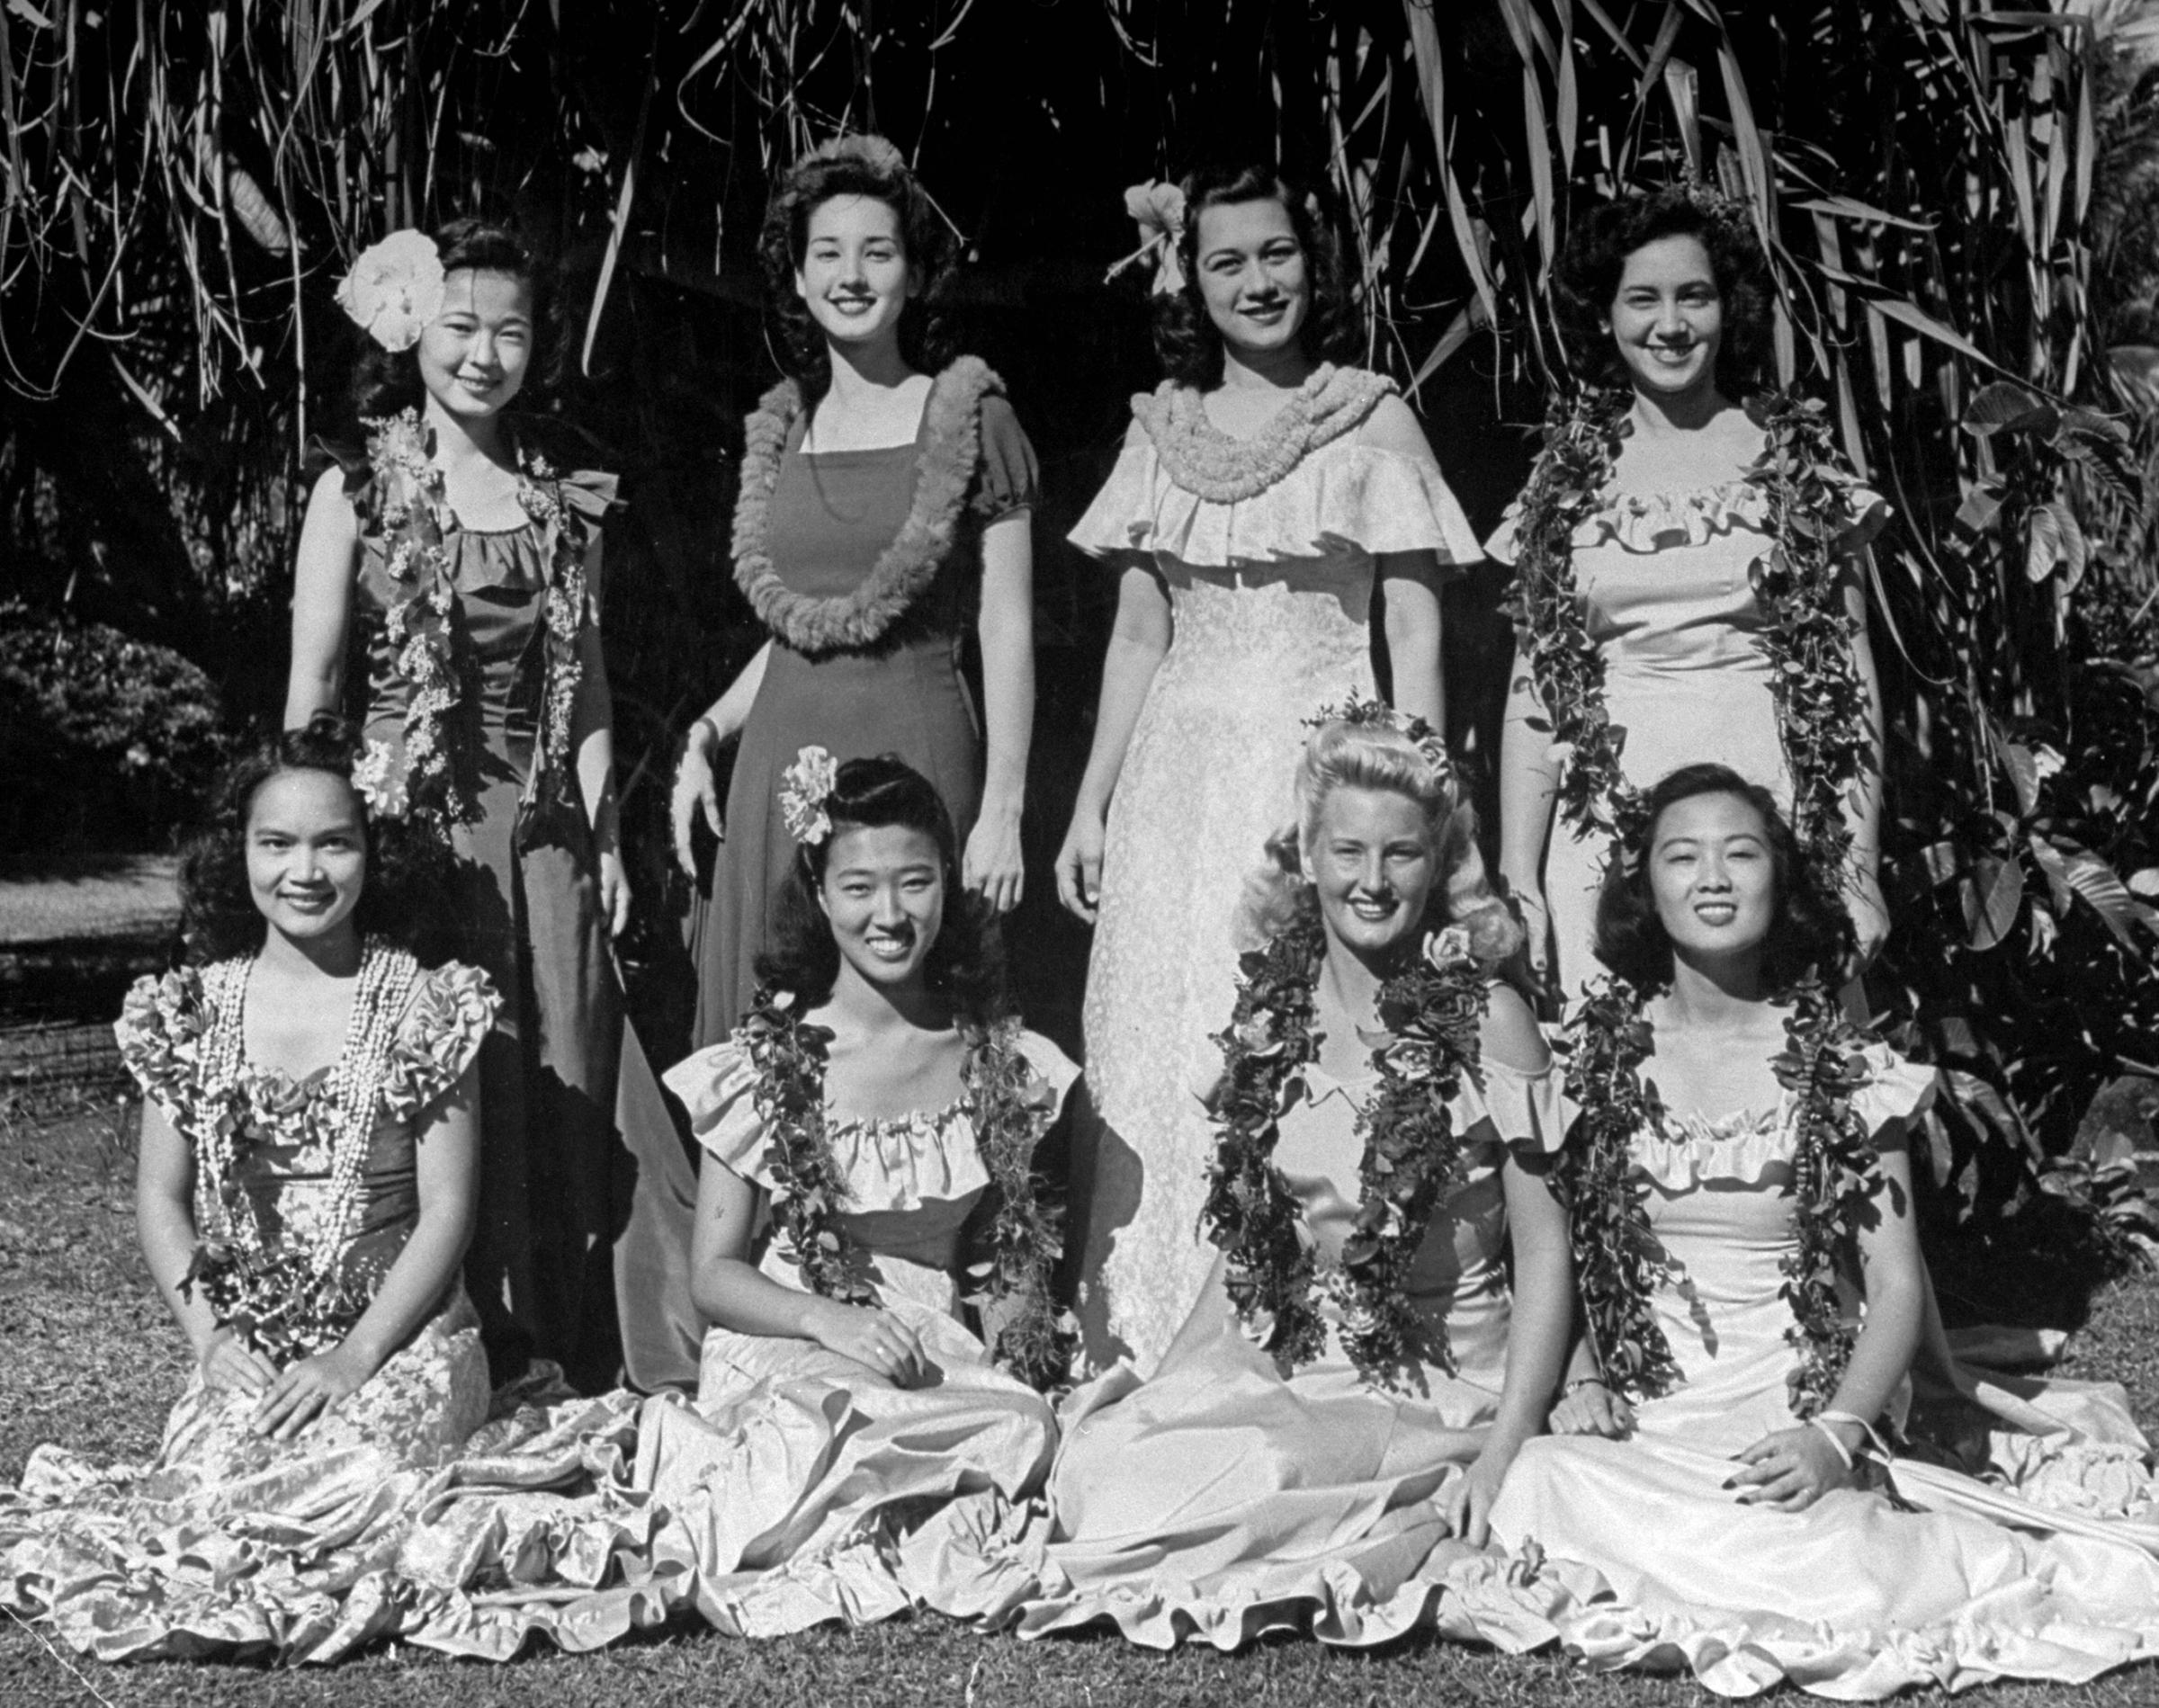 University of Hawaii girls who are chosen by the student body to serve as Princesses and Queen in annual May Day ceremony held at the University.